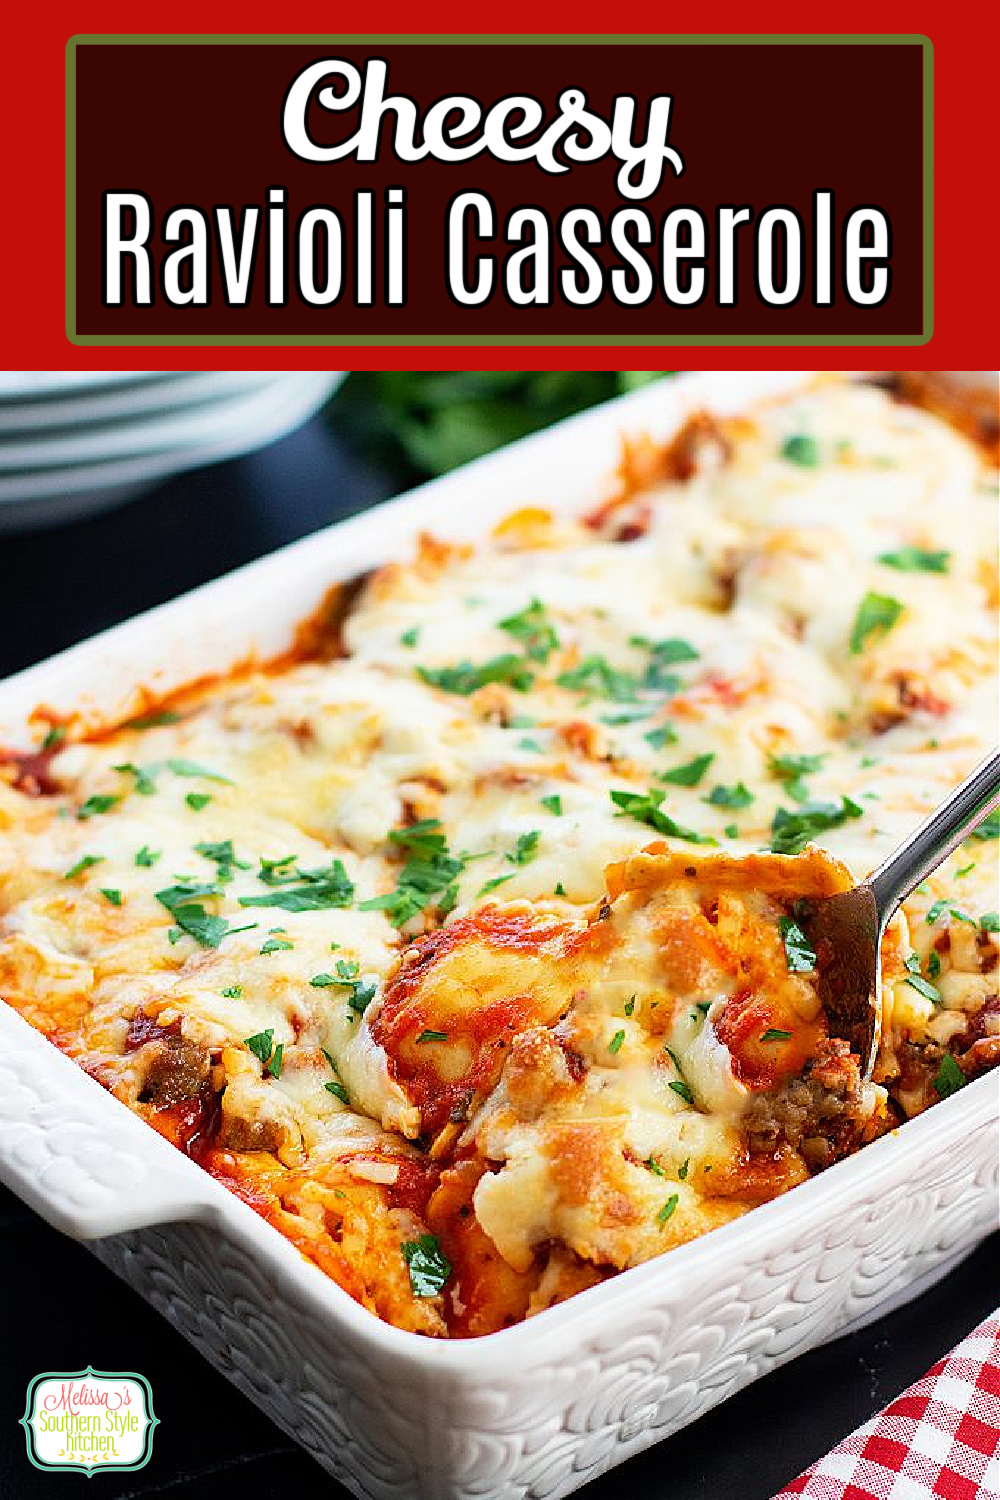 This easy layered Ravioli Casserole Recipe is simple enough for weekday dinner, yet impressive enough for entertaining #ravioli #raviolicasserole #casseroles #pasta #fourcheeseravioli #easycasserolerecipes #pastacasseroles #fourcheeseraviolirecipe #cheeseravioli